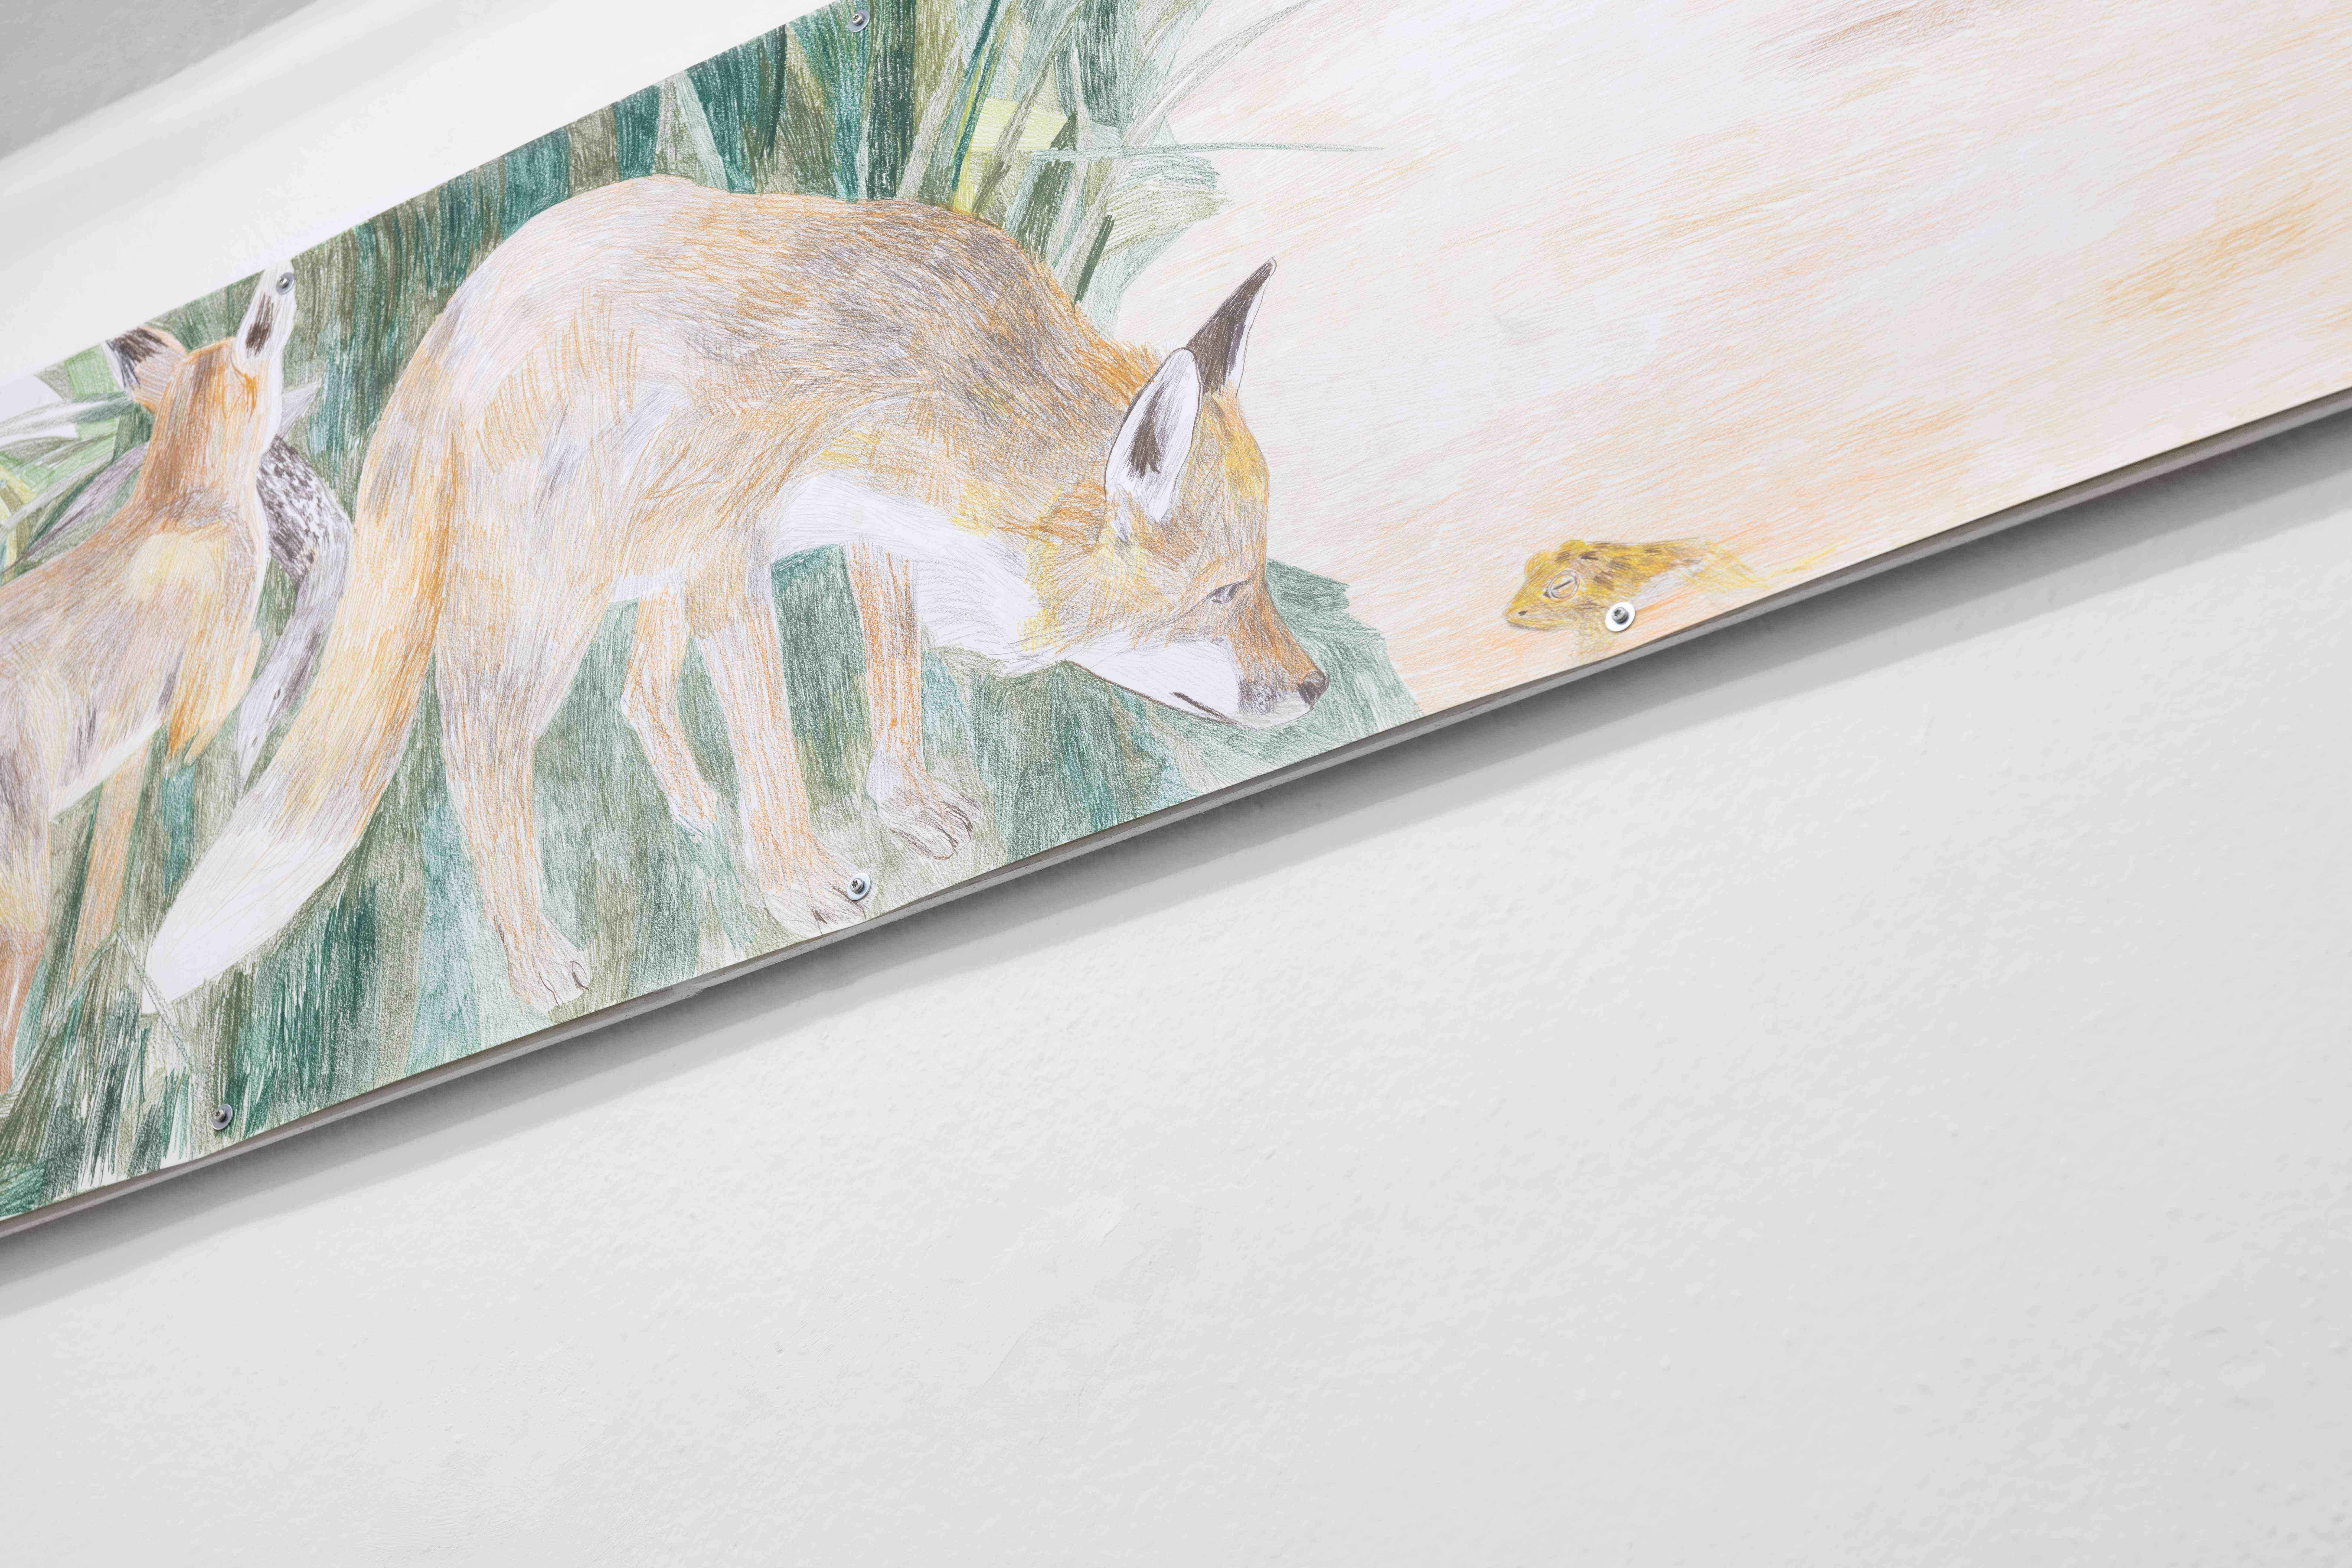 Agnese Galiotto, Of foxes and birds. Stories from the hill. (West), 2023, Crayon on paper on drywall mount, 480cm x 60cm, (detail)